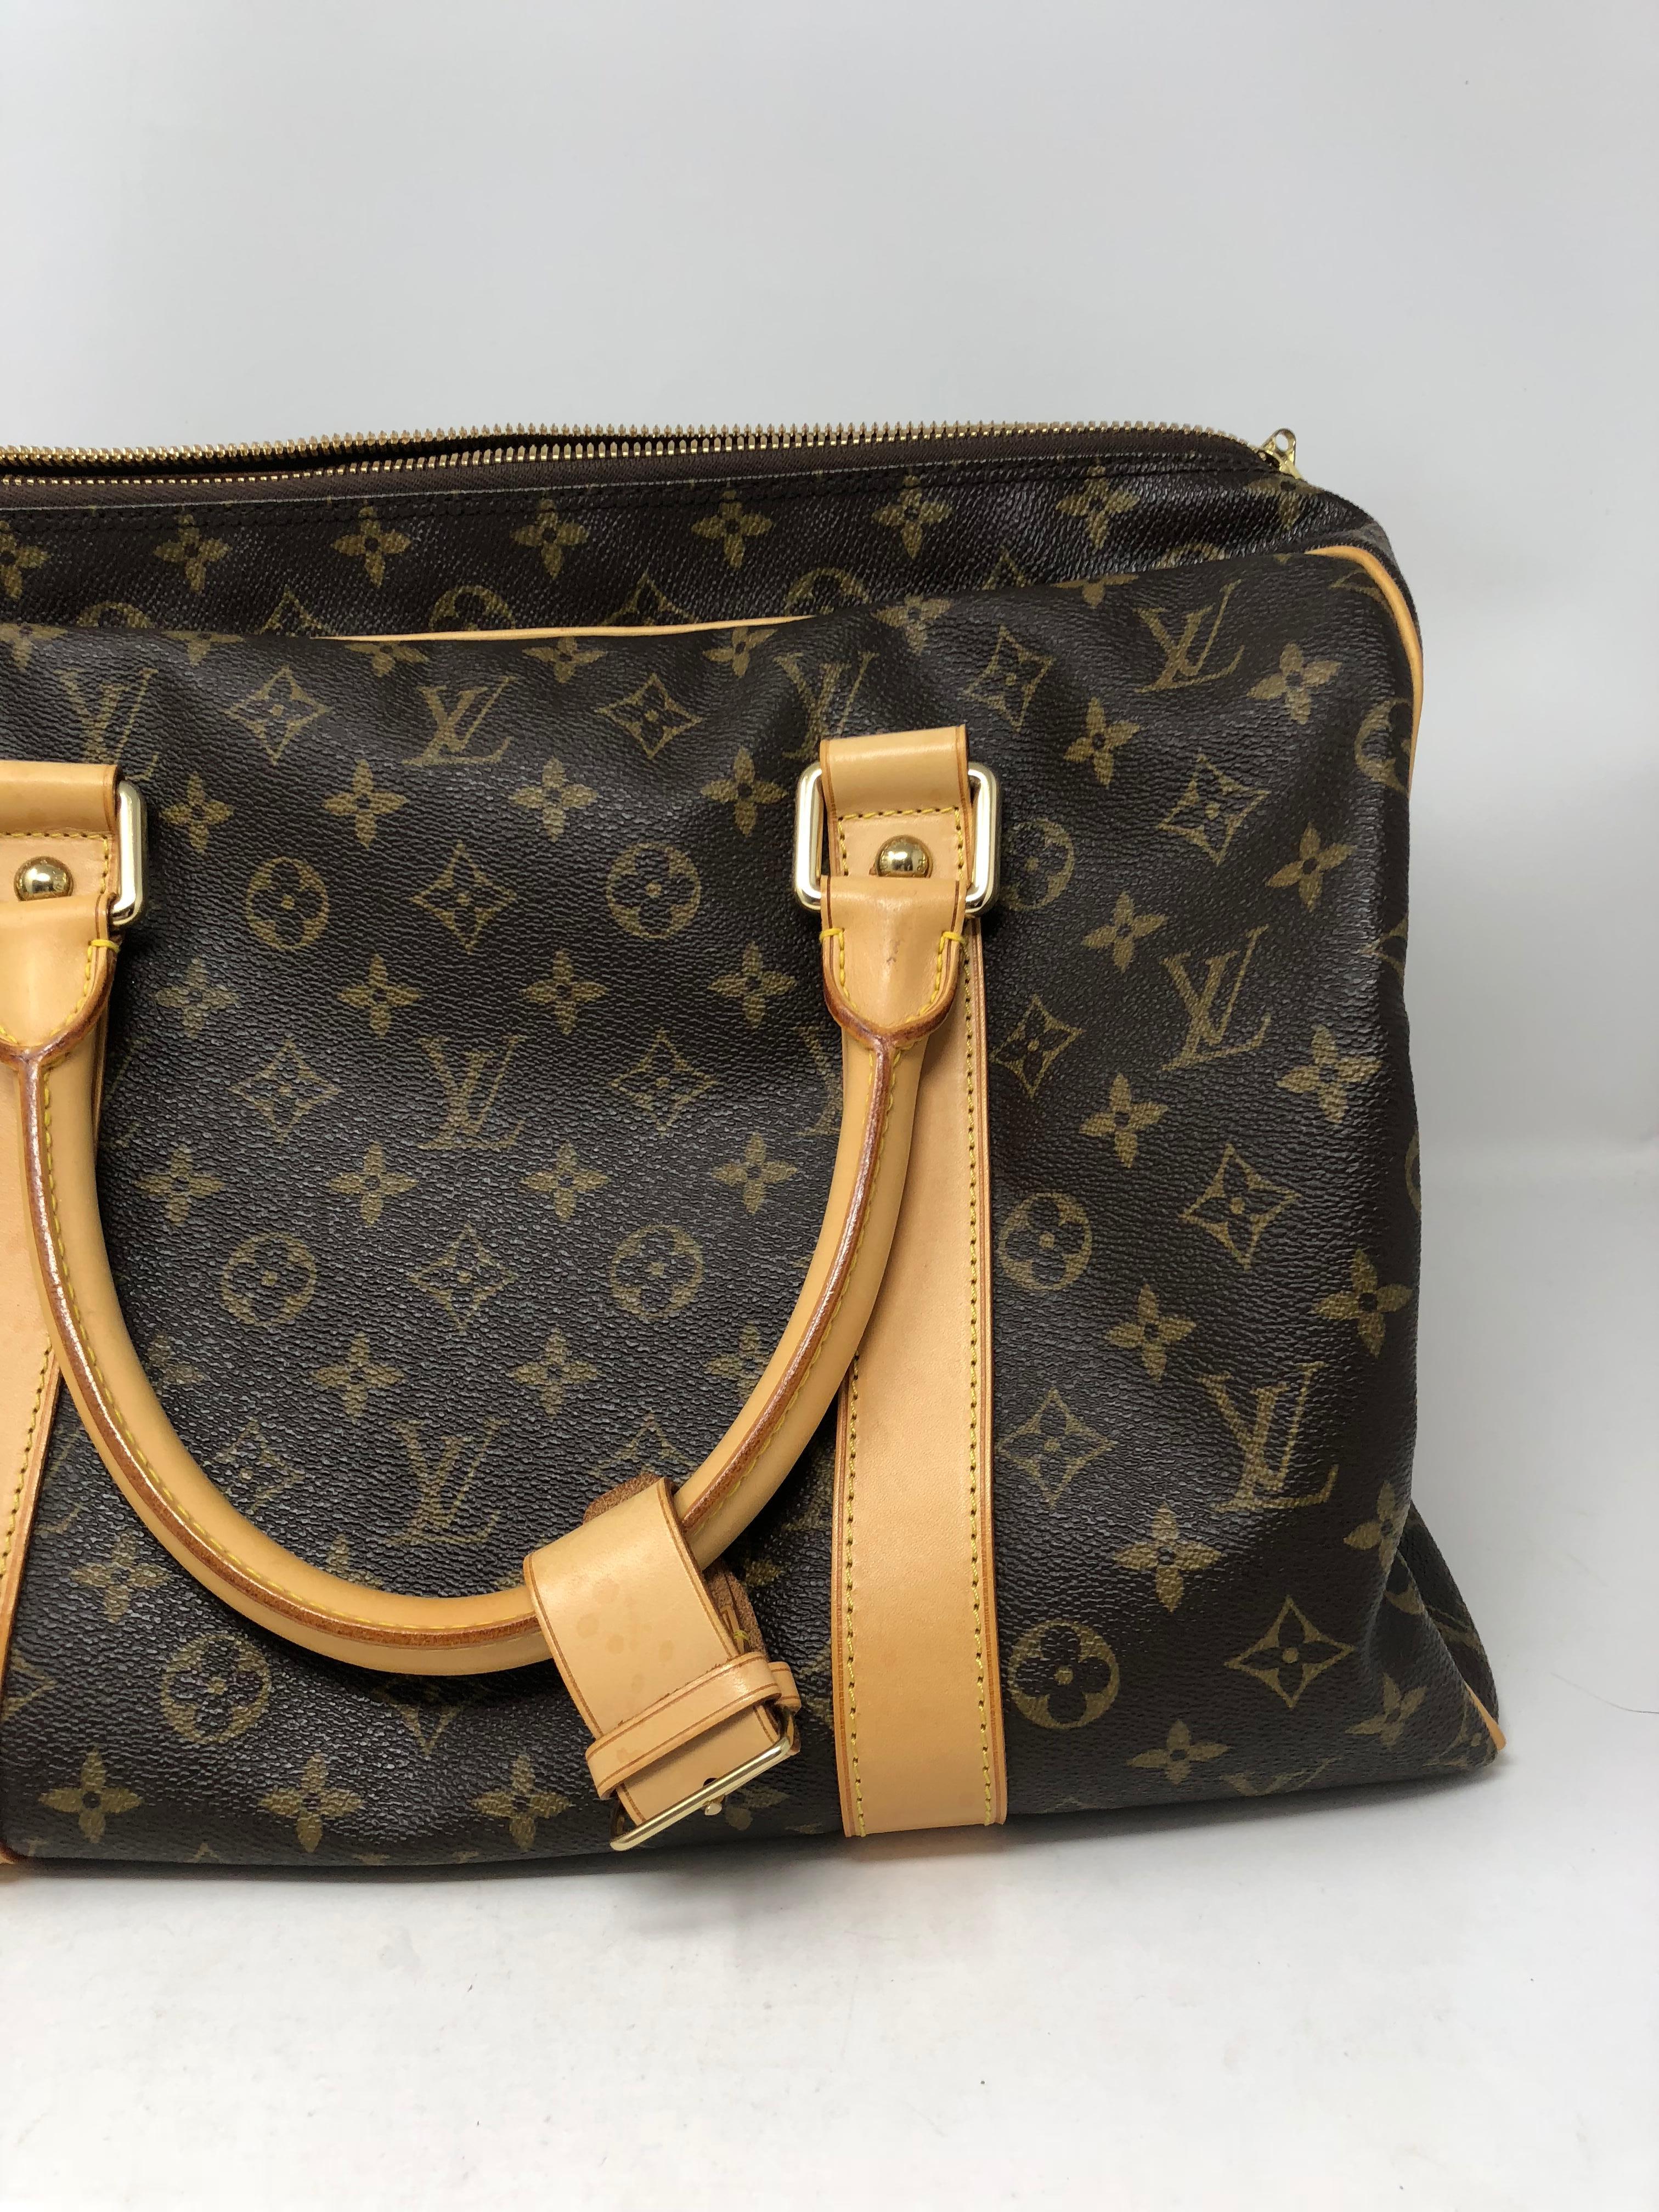 Louis Vuitton Carryall Bag in monogram coated canvas with vachetta leather trim. Rare luggage piece by LV in good condition. Looks almost new and interior is clean. Date code inside reads TH0096. From 9th month of 2006. Guaranteed authentic. 